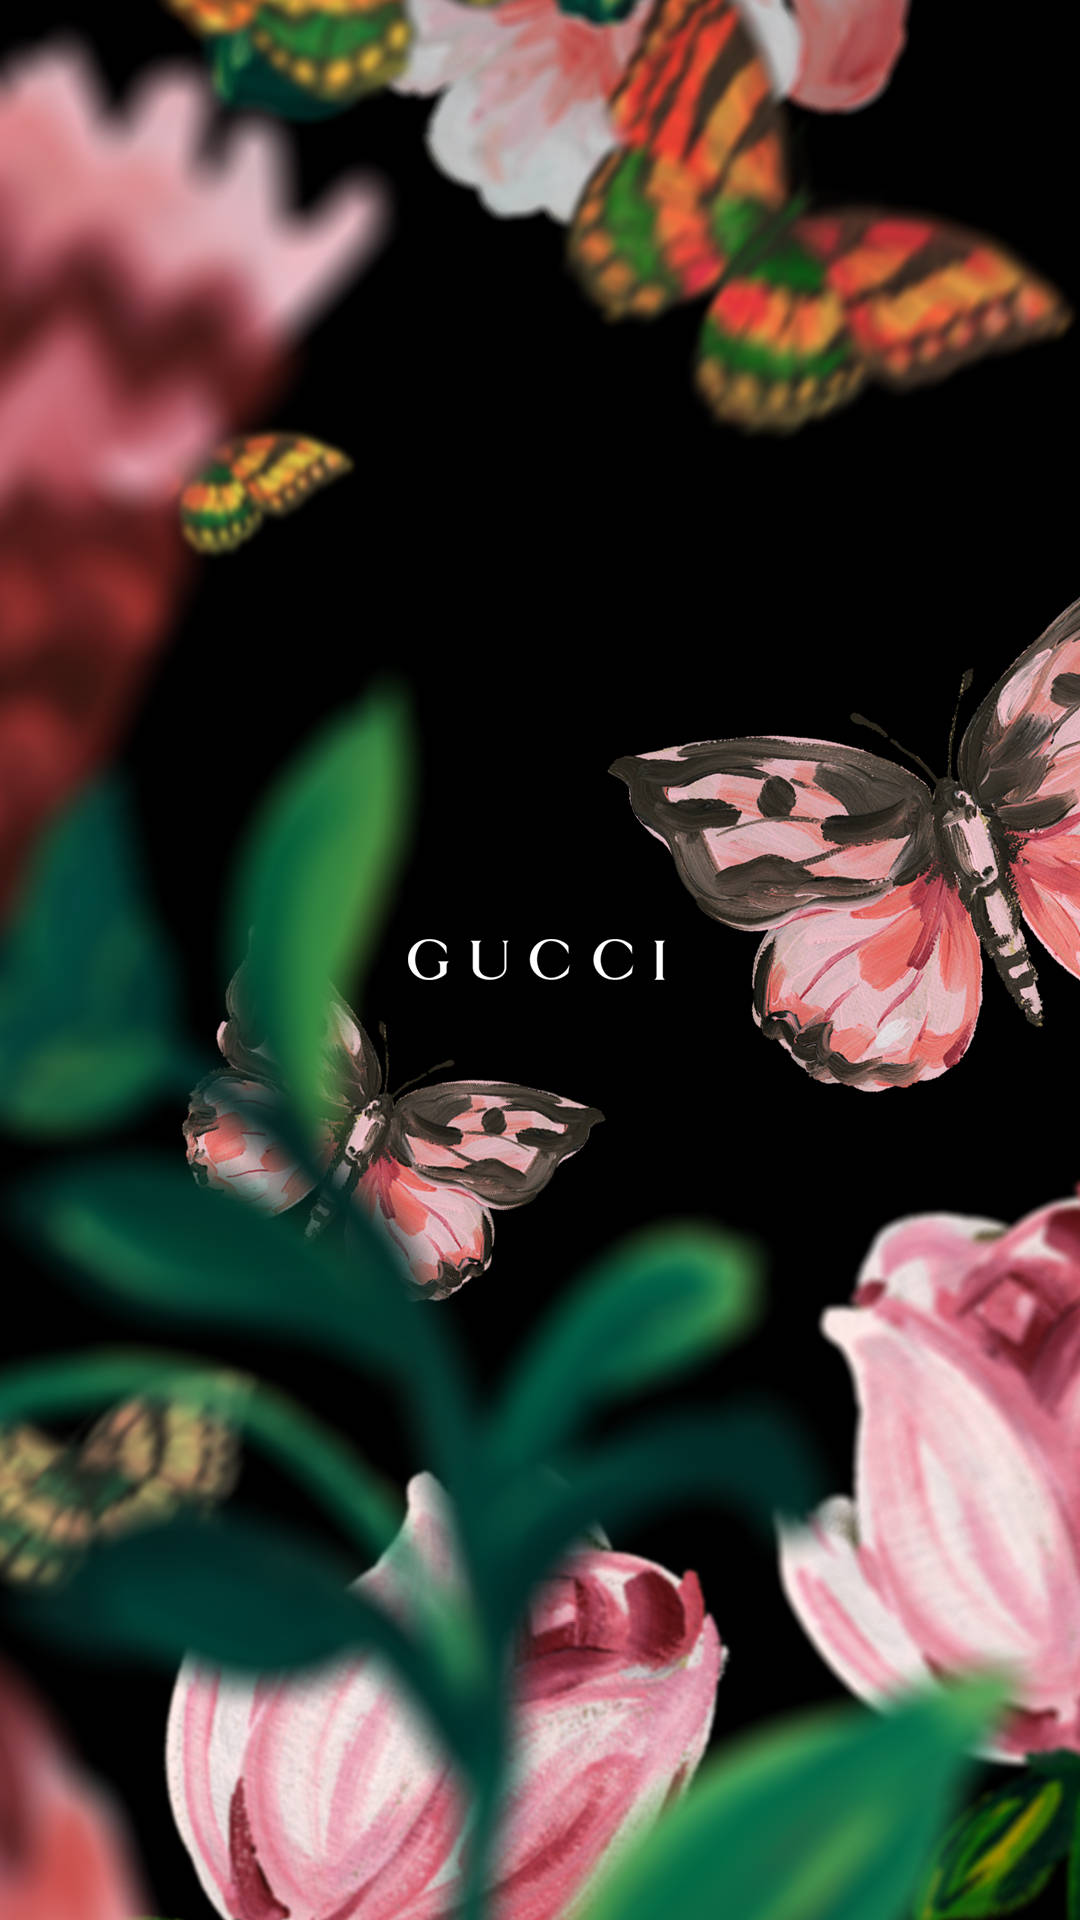 Top 999+ Gucci Iphone Wallpaper Full HD, 4K✅Free to Use